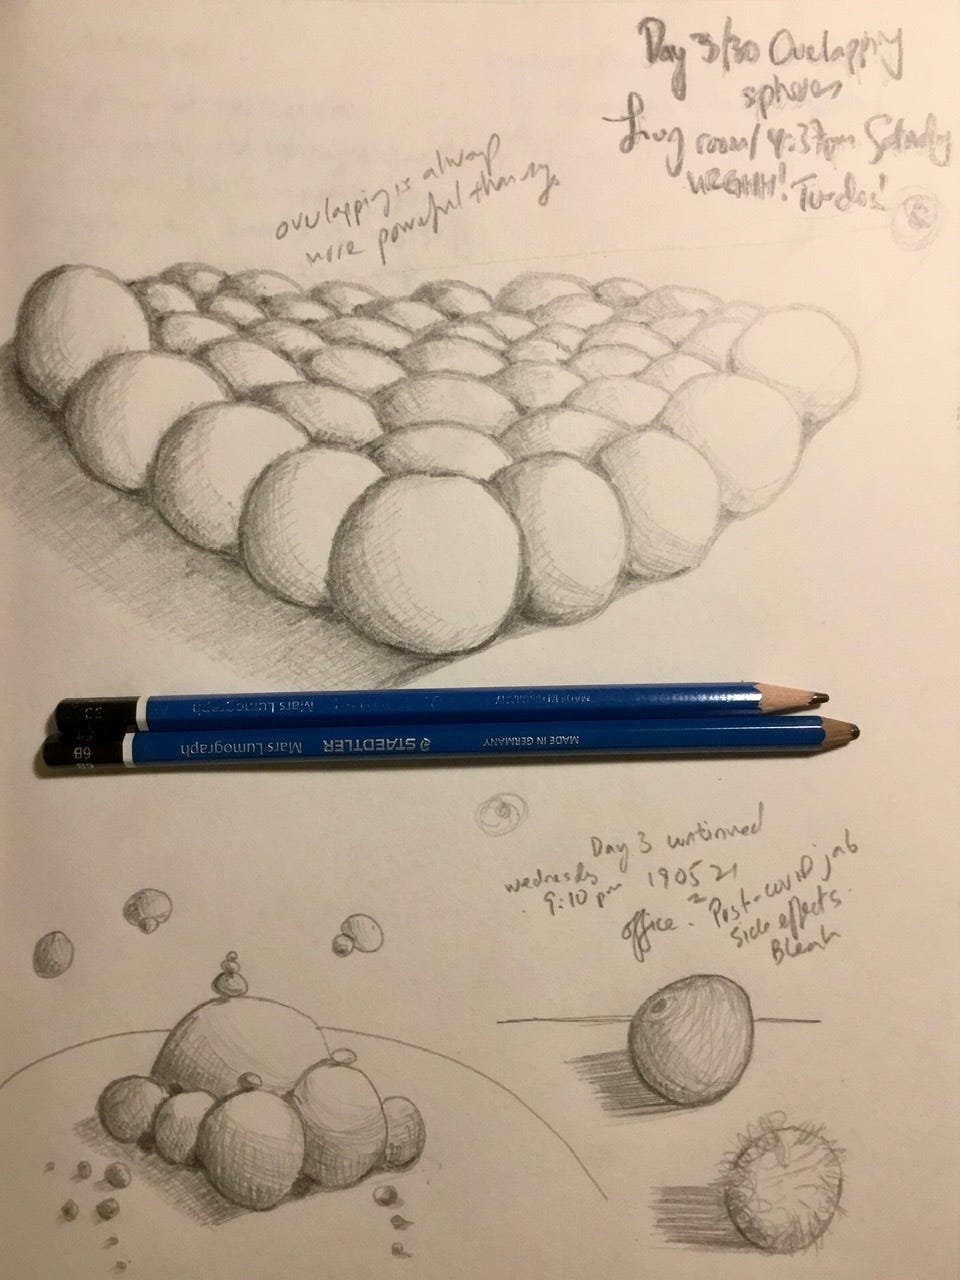 Pencil drawing of spheres with cross hatching